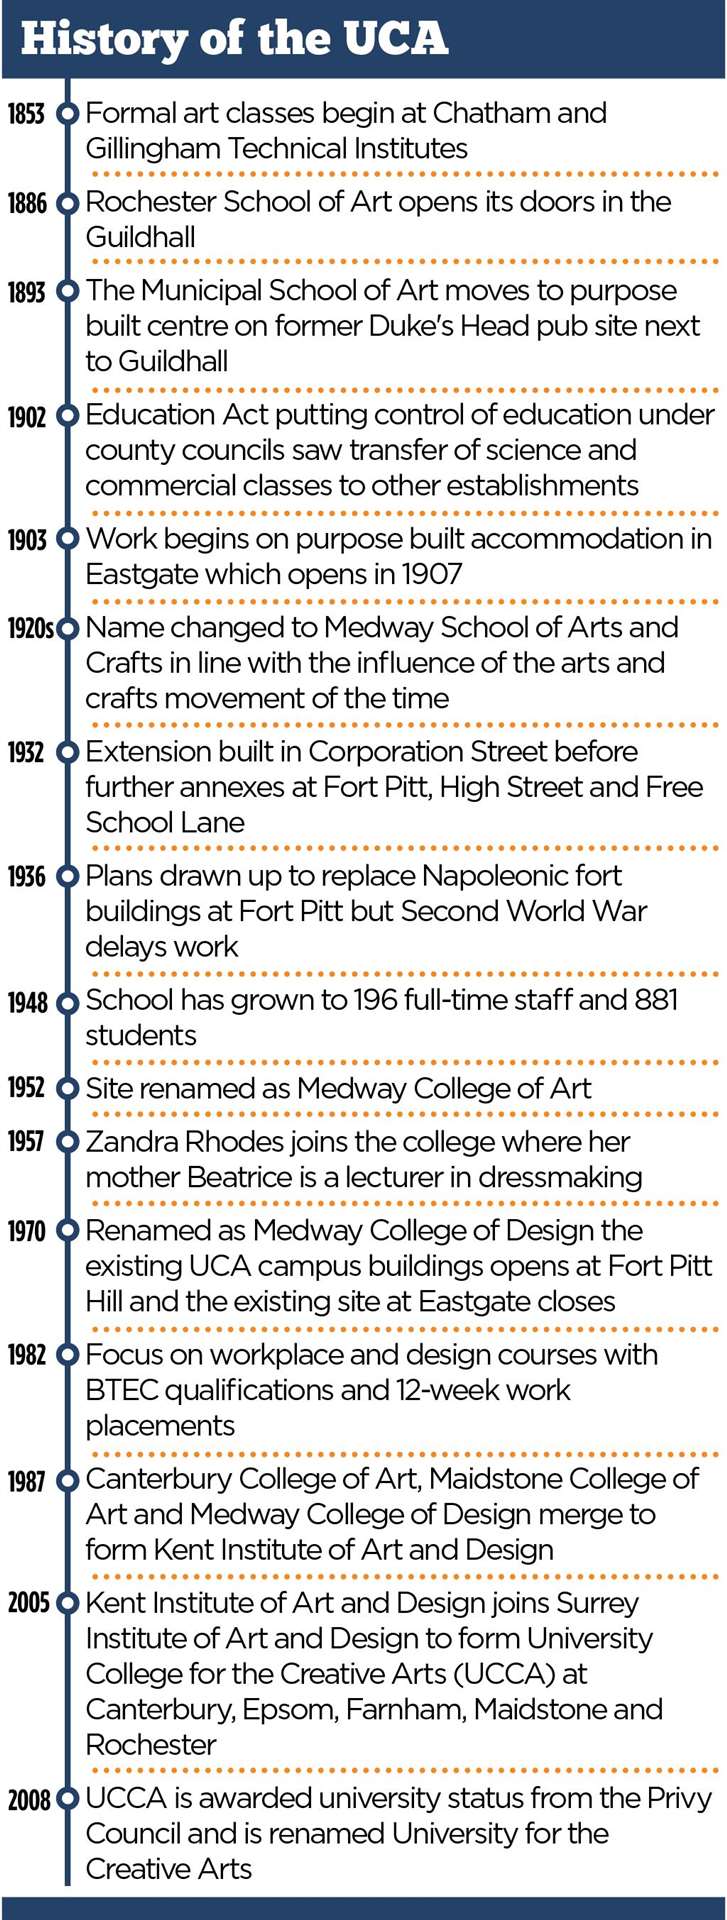 UCA timeline setting out the institution's history going back to the 1800s